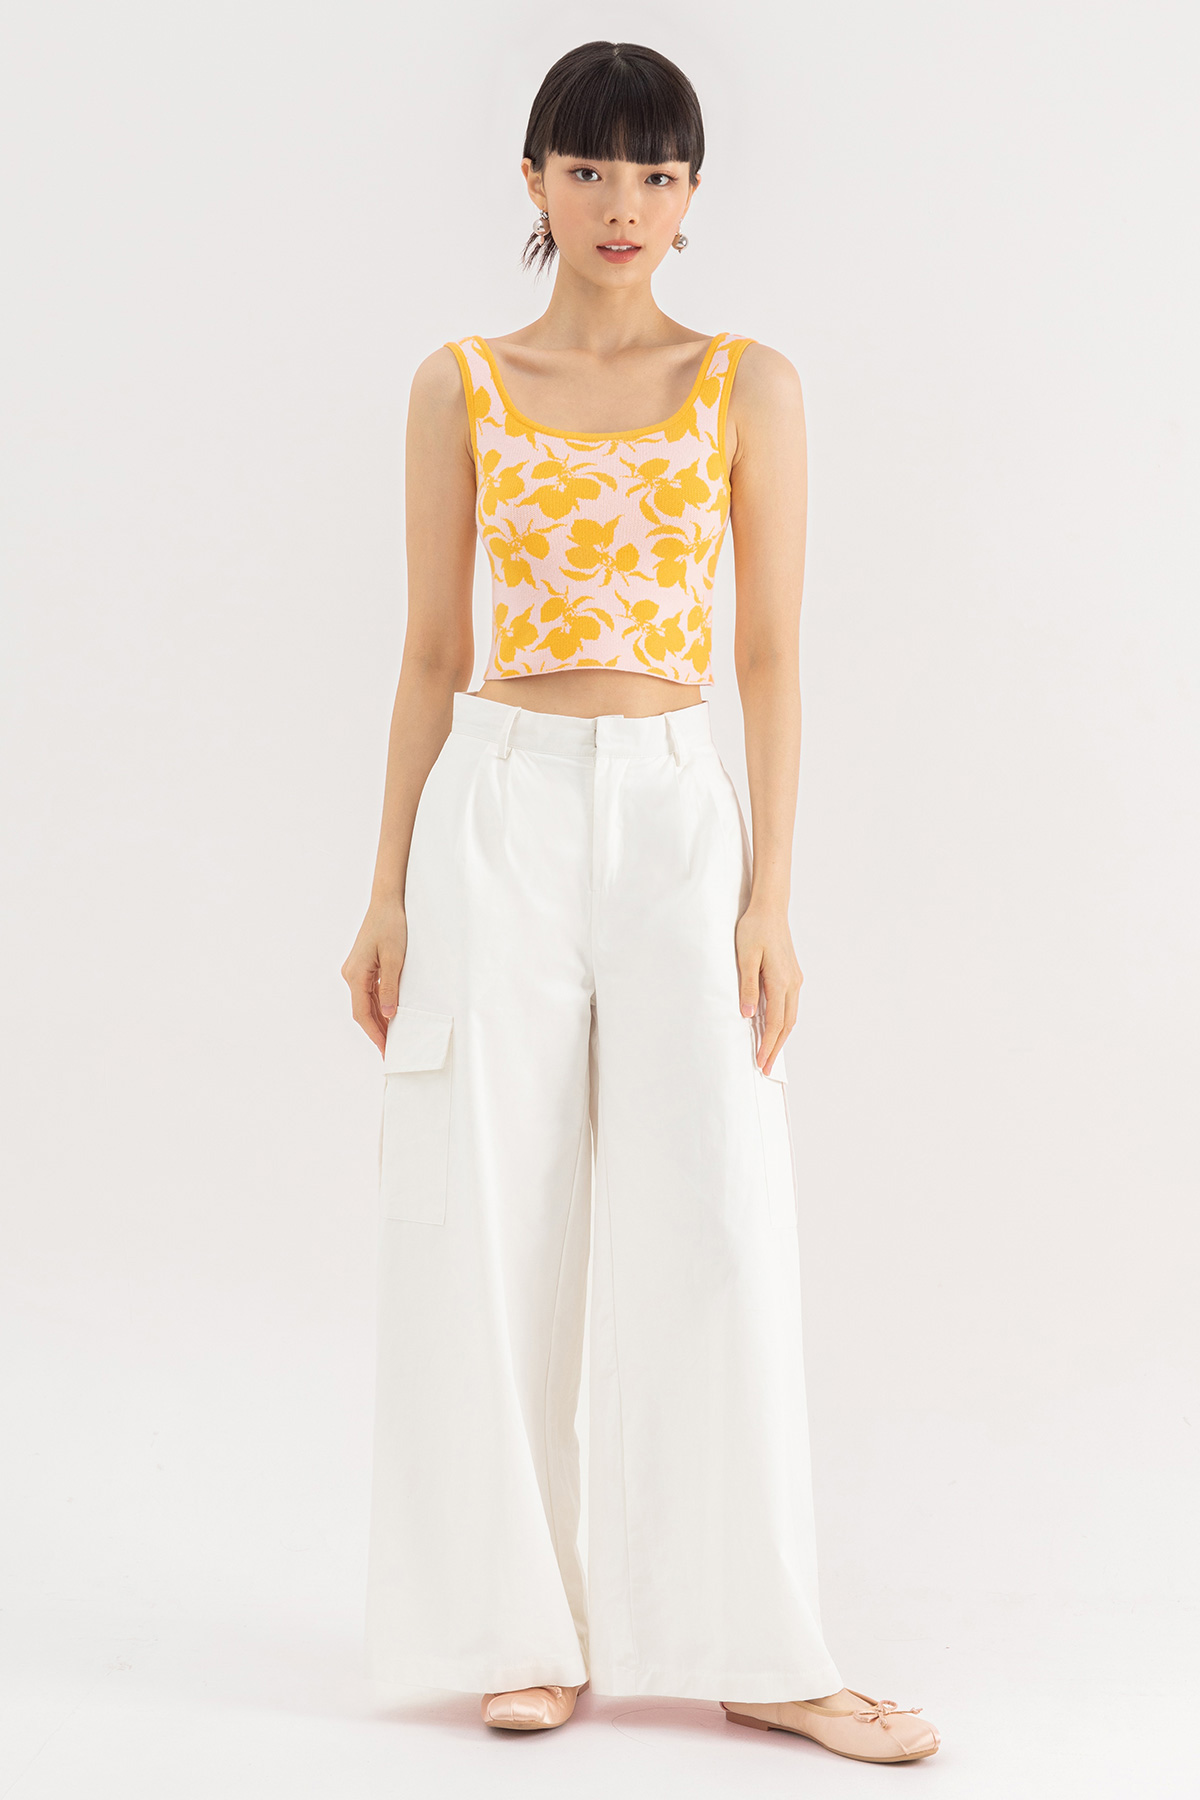 *SALE* ODILE TOP - LIMONATA [BY MODPARADE]